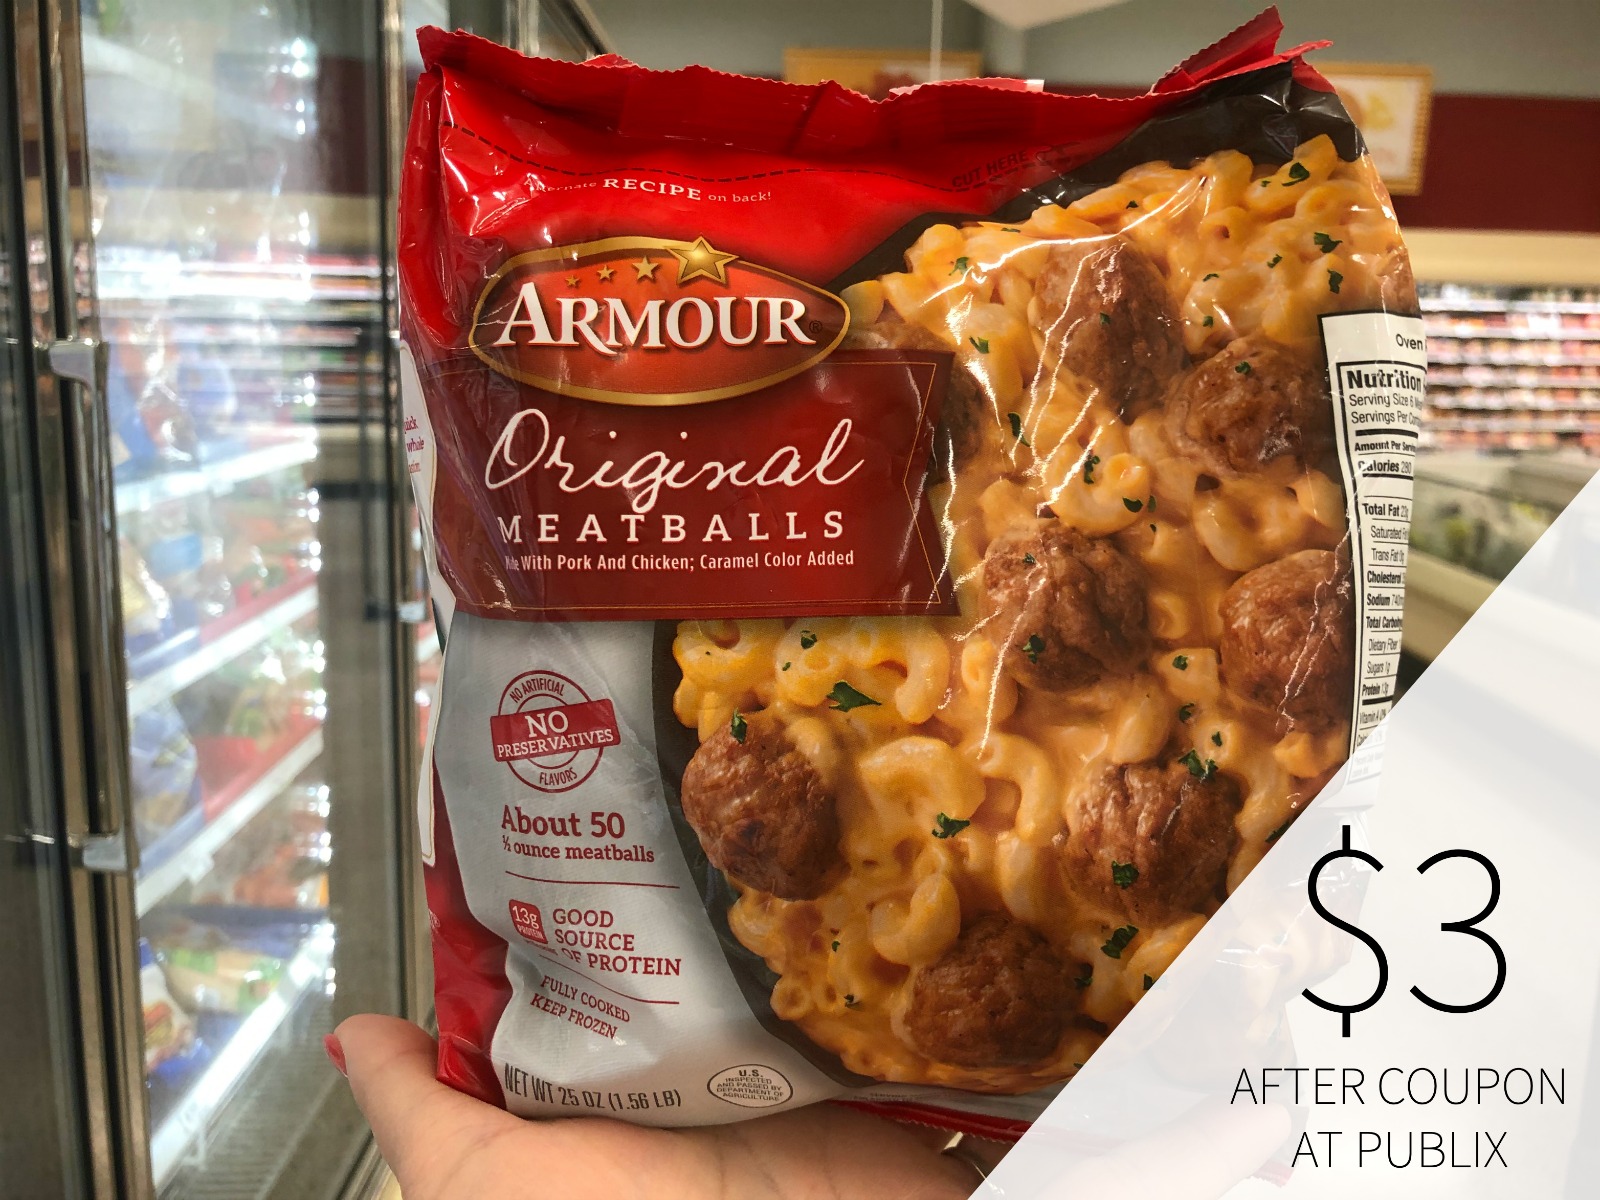 Grab A Fantastic Deal On Armour Meatballs This Week At Publix – BOGO Sale & Coupon Combo!